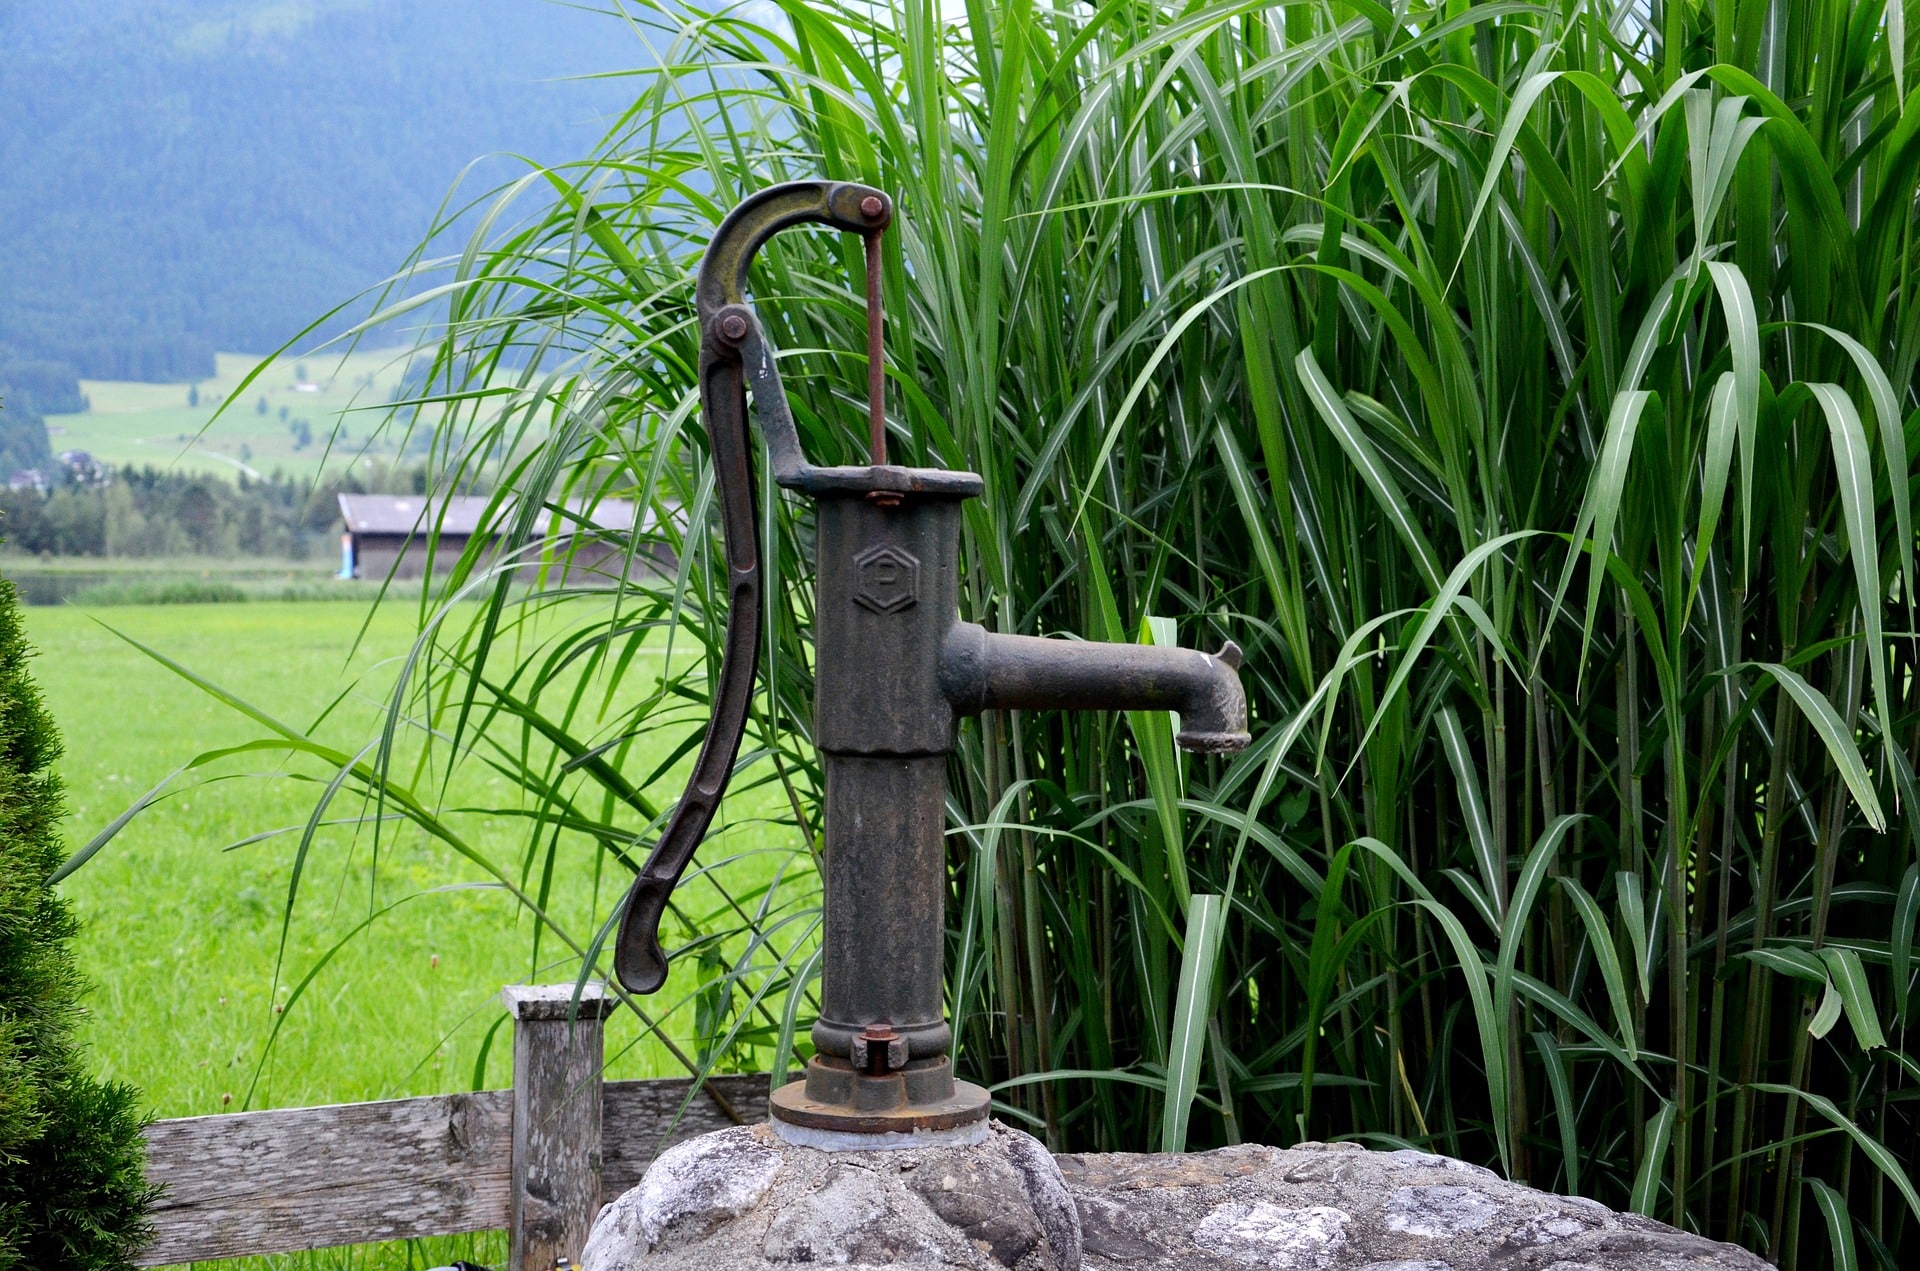 What Every Homeowner Should Know About Their Well Water System